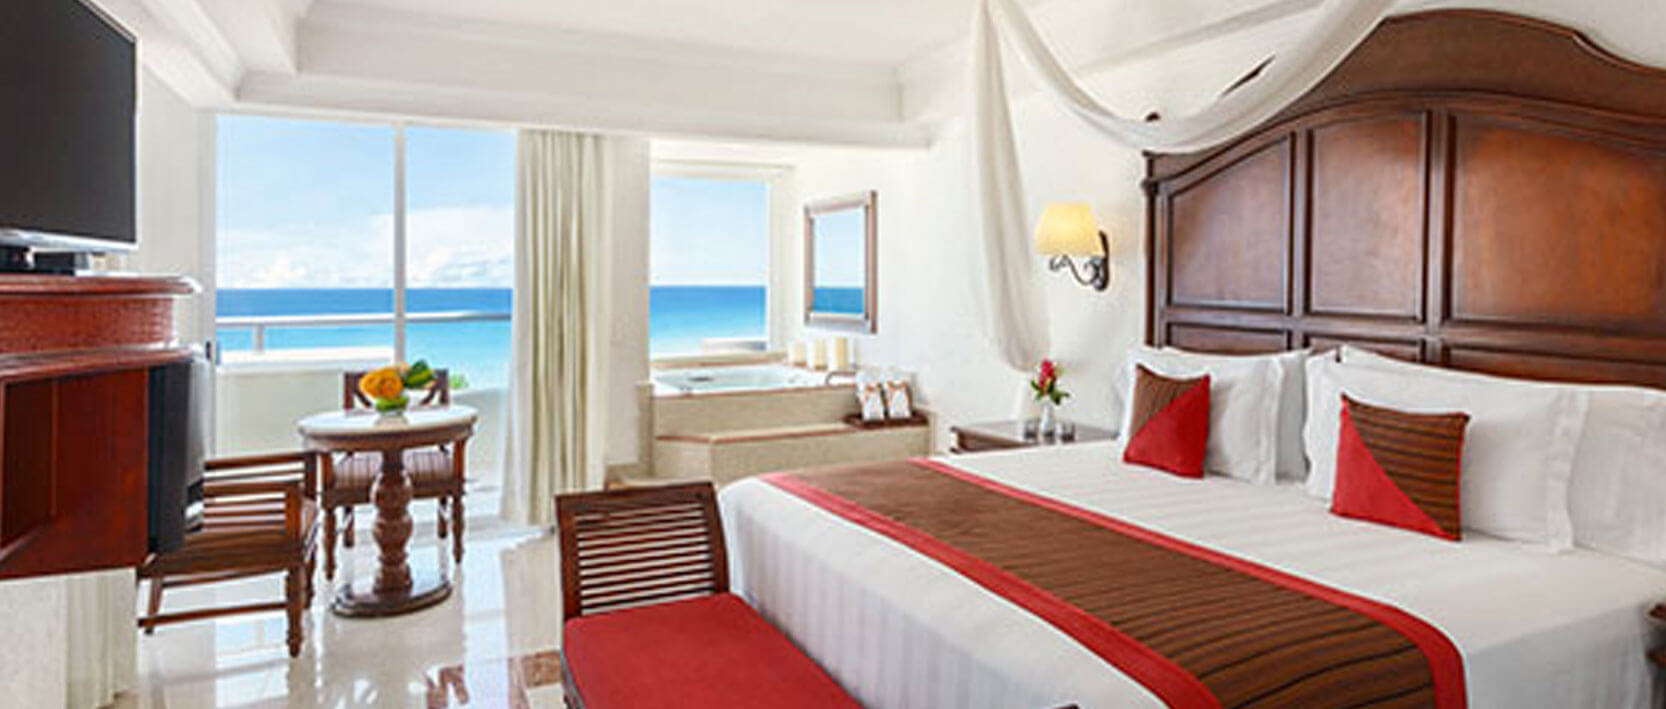 Gran Caribe Cancun Accommodations - Gran Master One-Bedroom Suite Ocean View